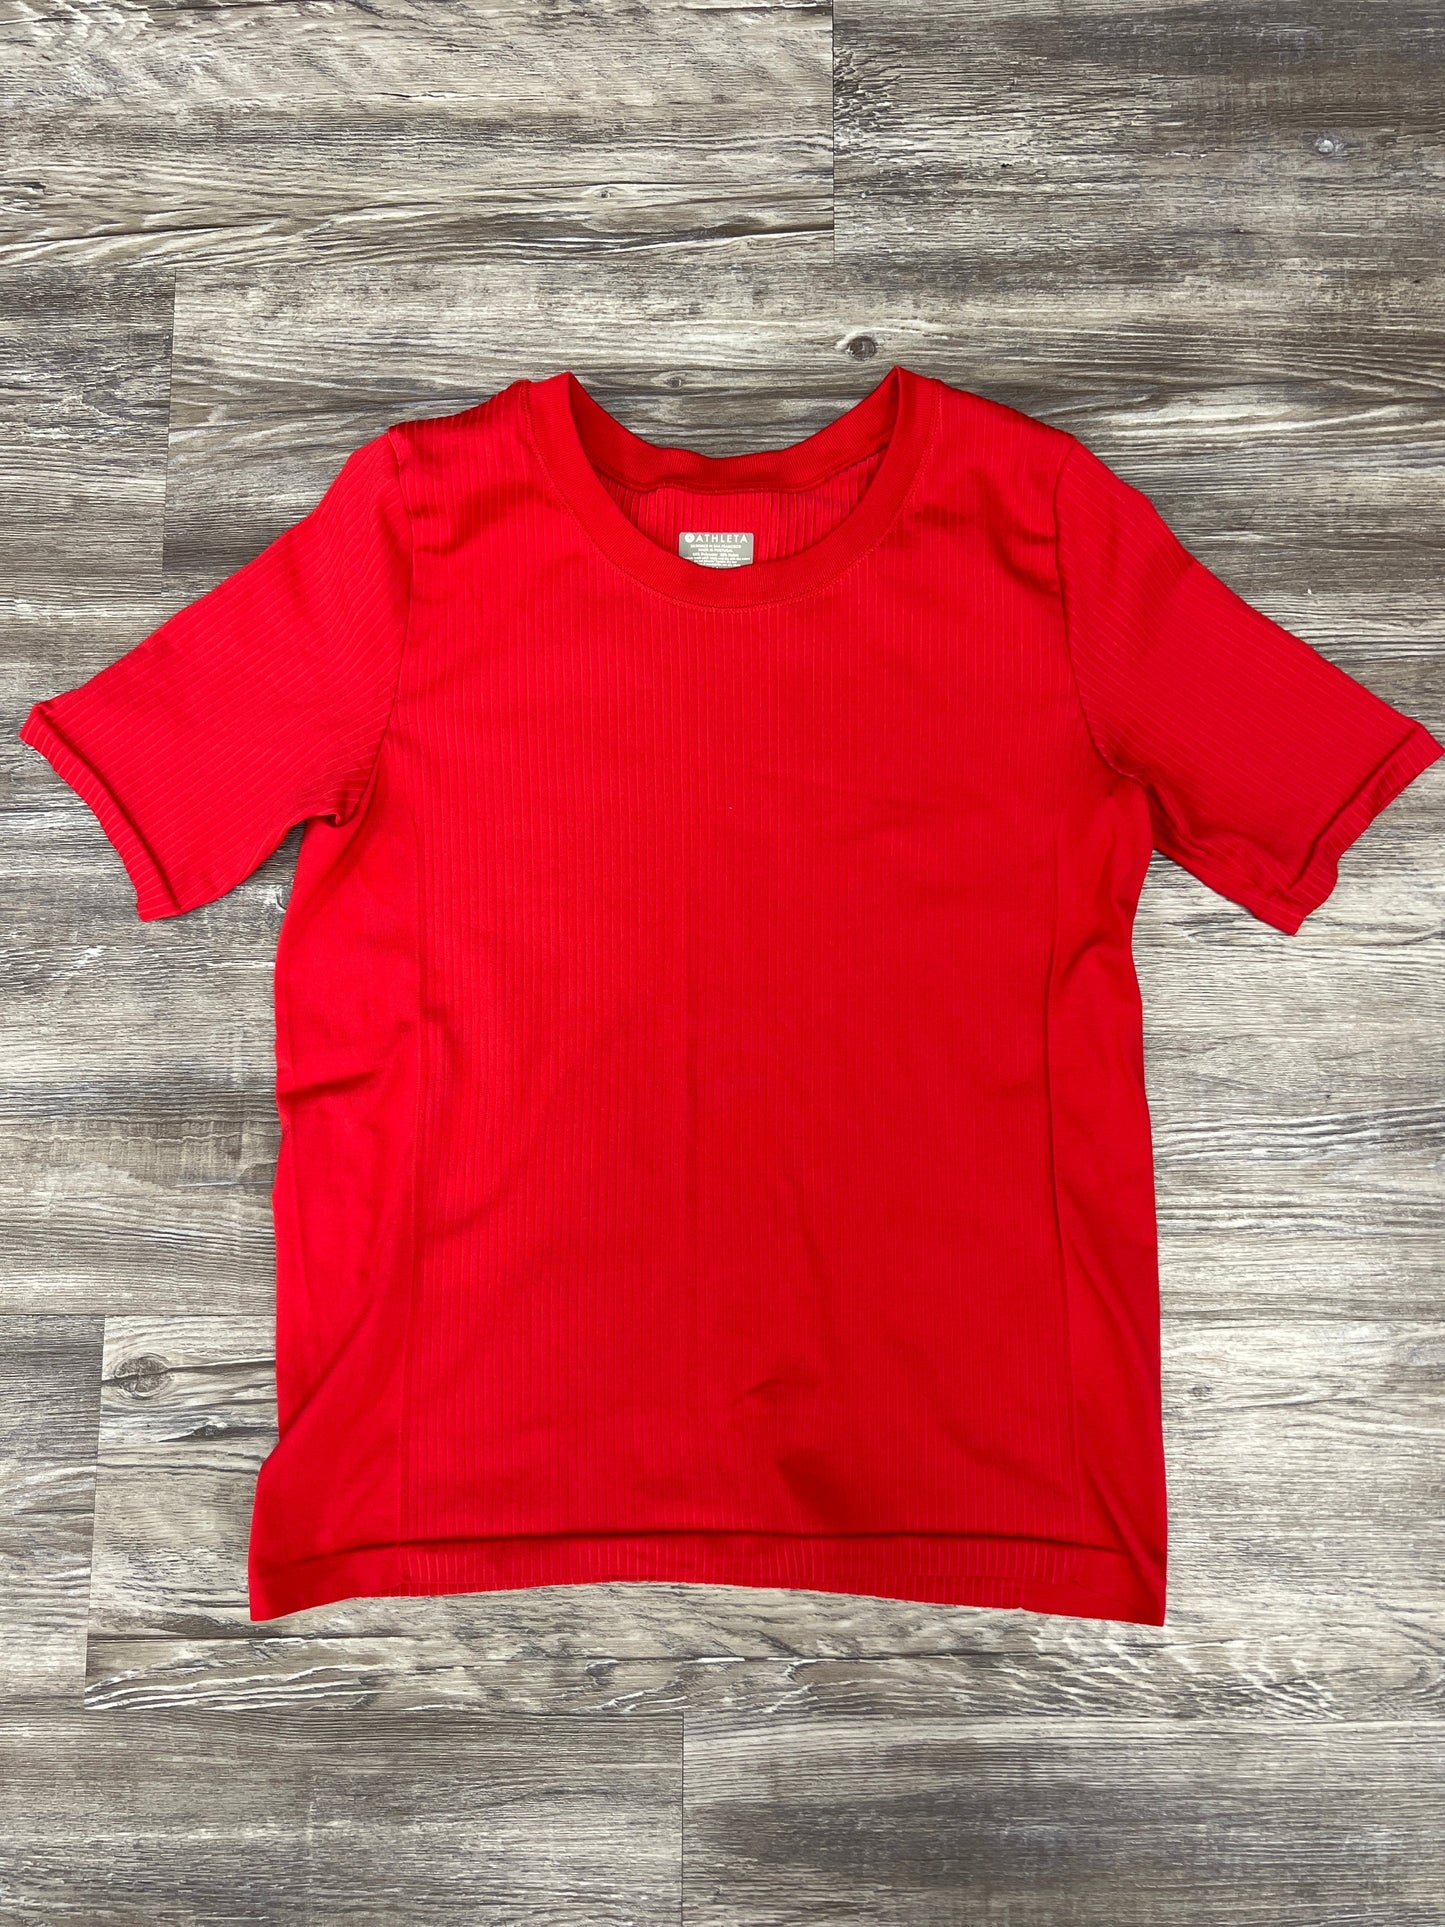 Red Athletic Top Short Sleeve Athleta, Size M